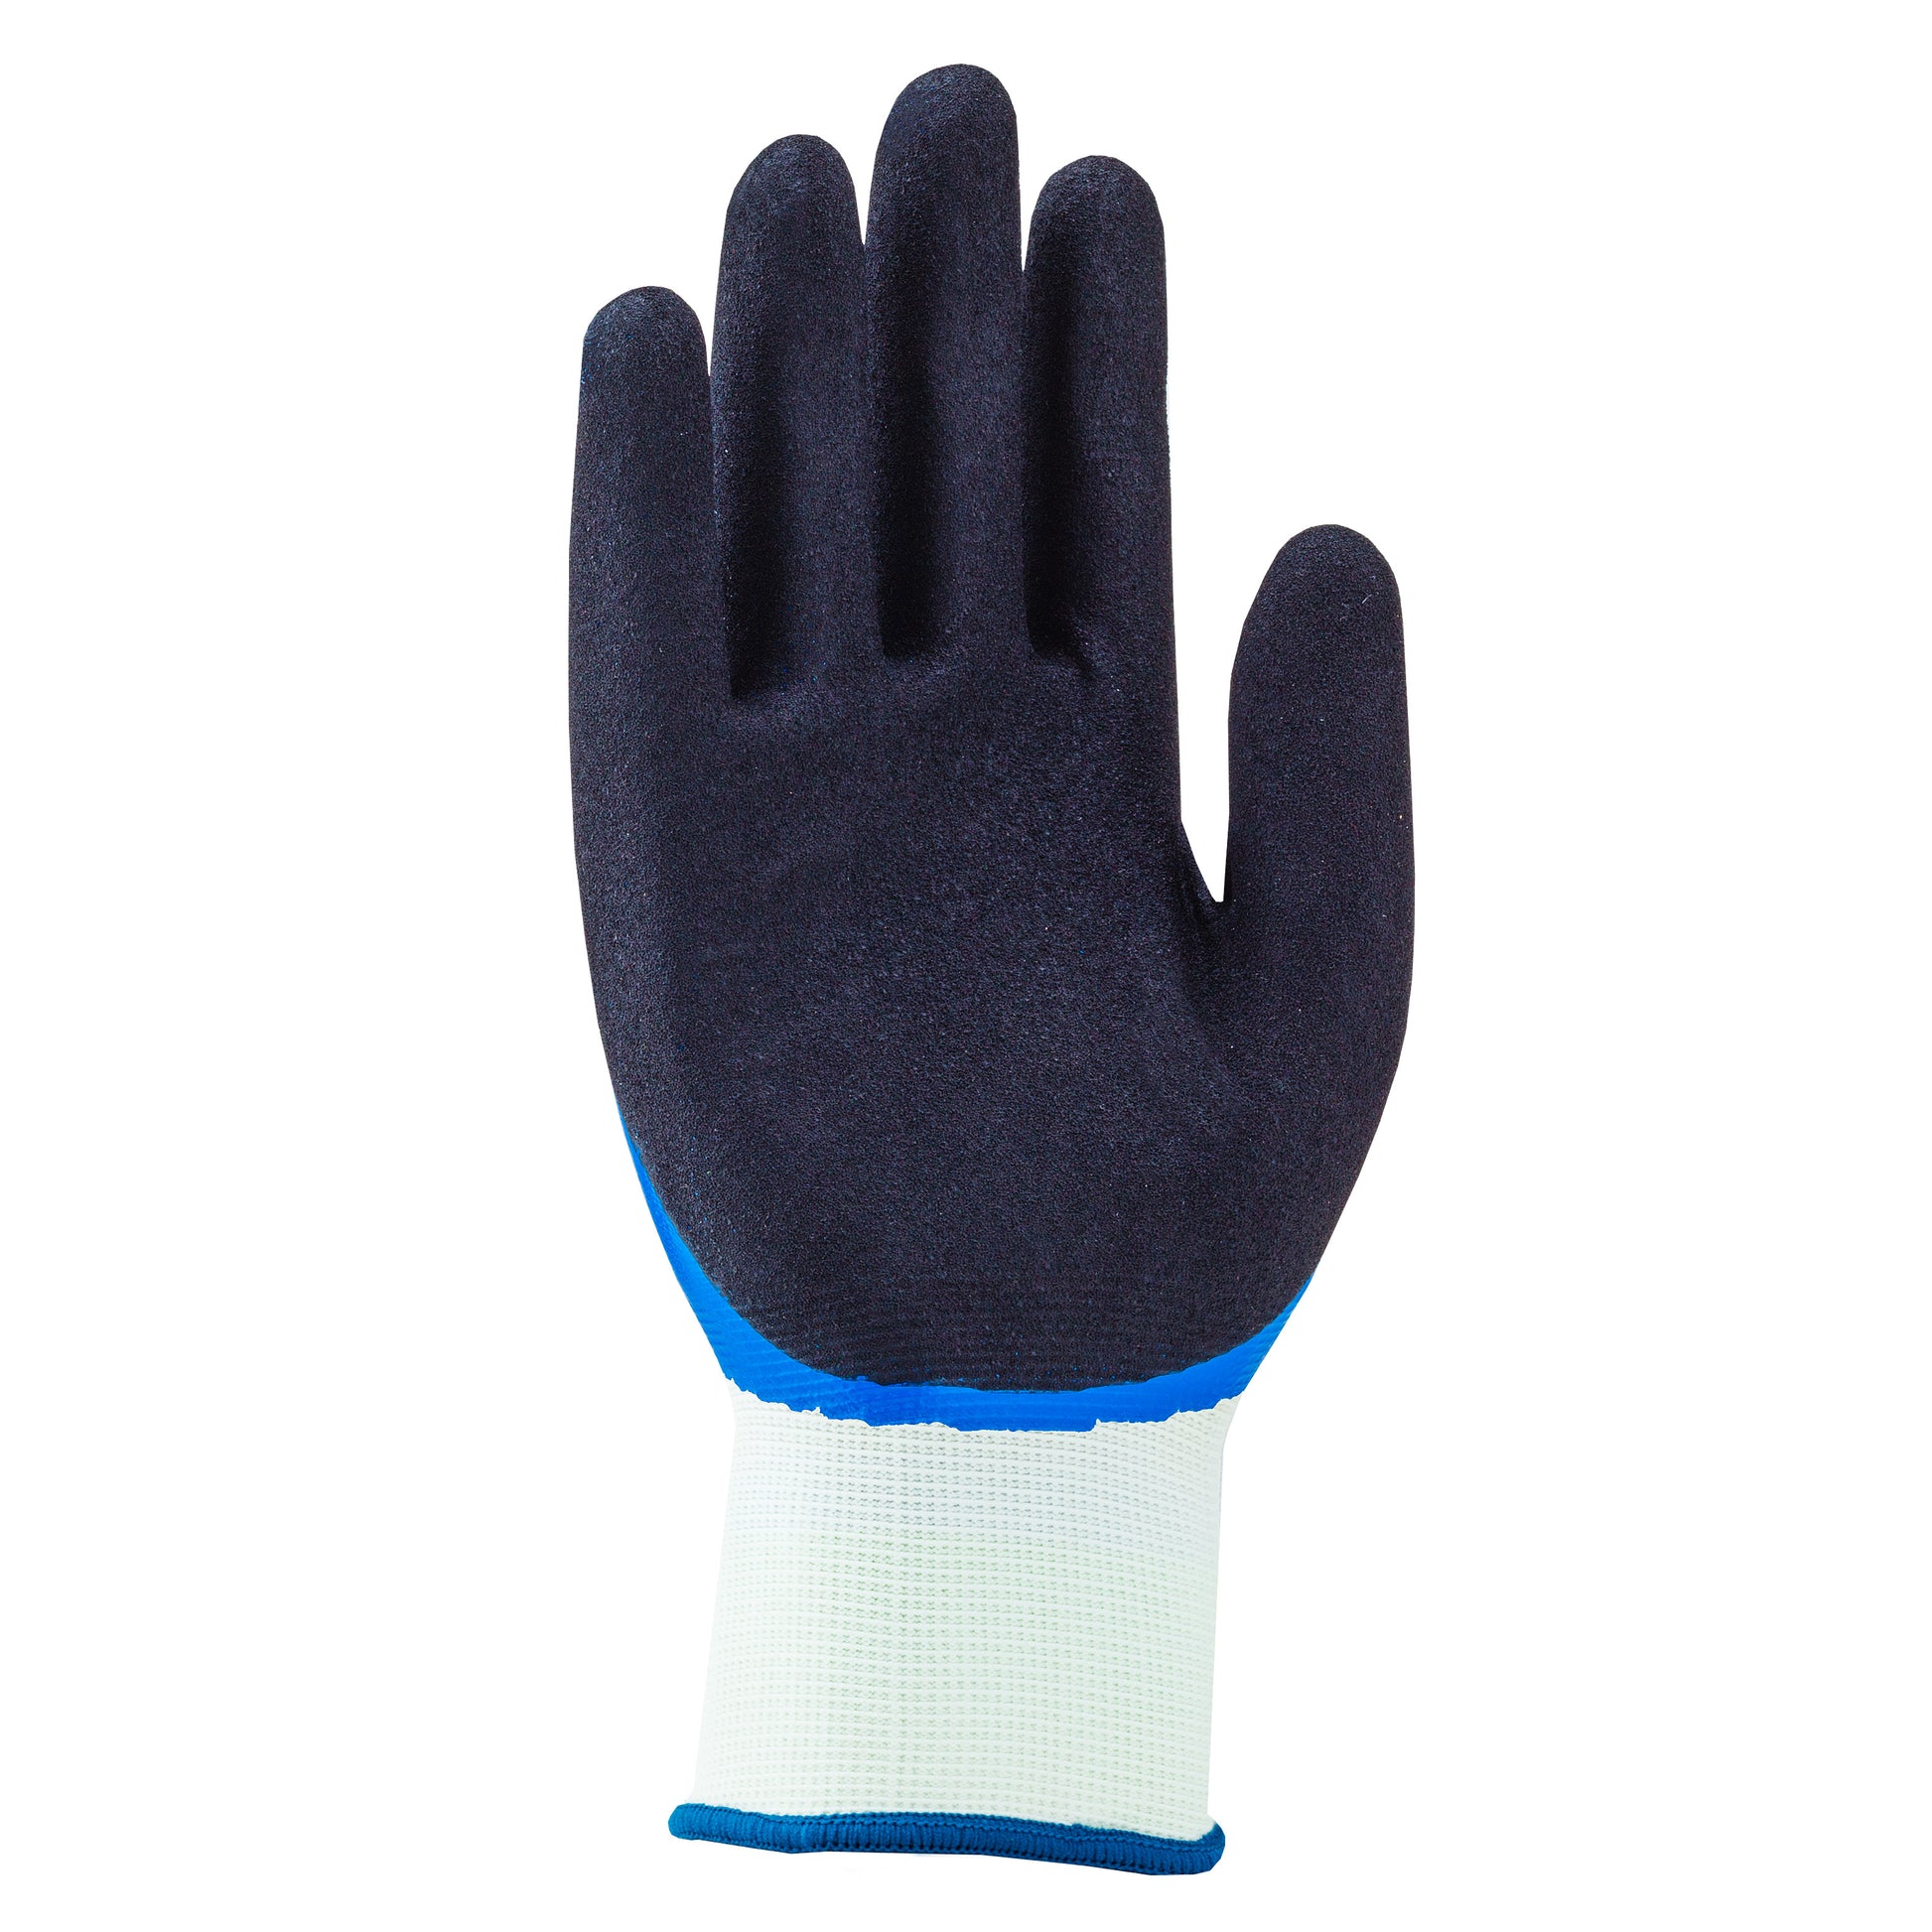 uvex unilite 7710F an excellent multi-purpose glove, but particularly ideal for oily and greasy applications. EN407 Level 1 certification giving contact heat protection up to 100°C, makes these gloves perfect for low risk contact hot handling. protexU